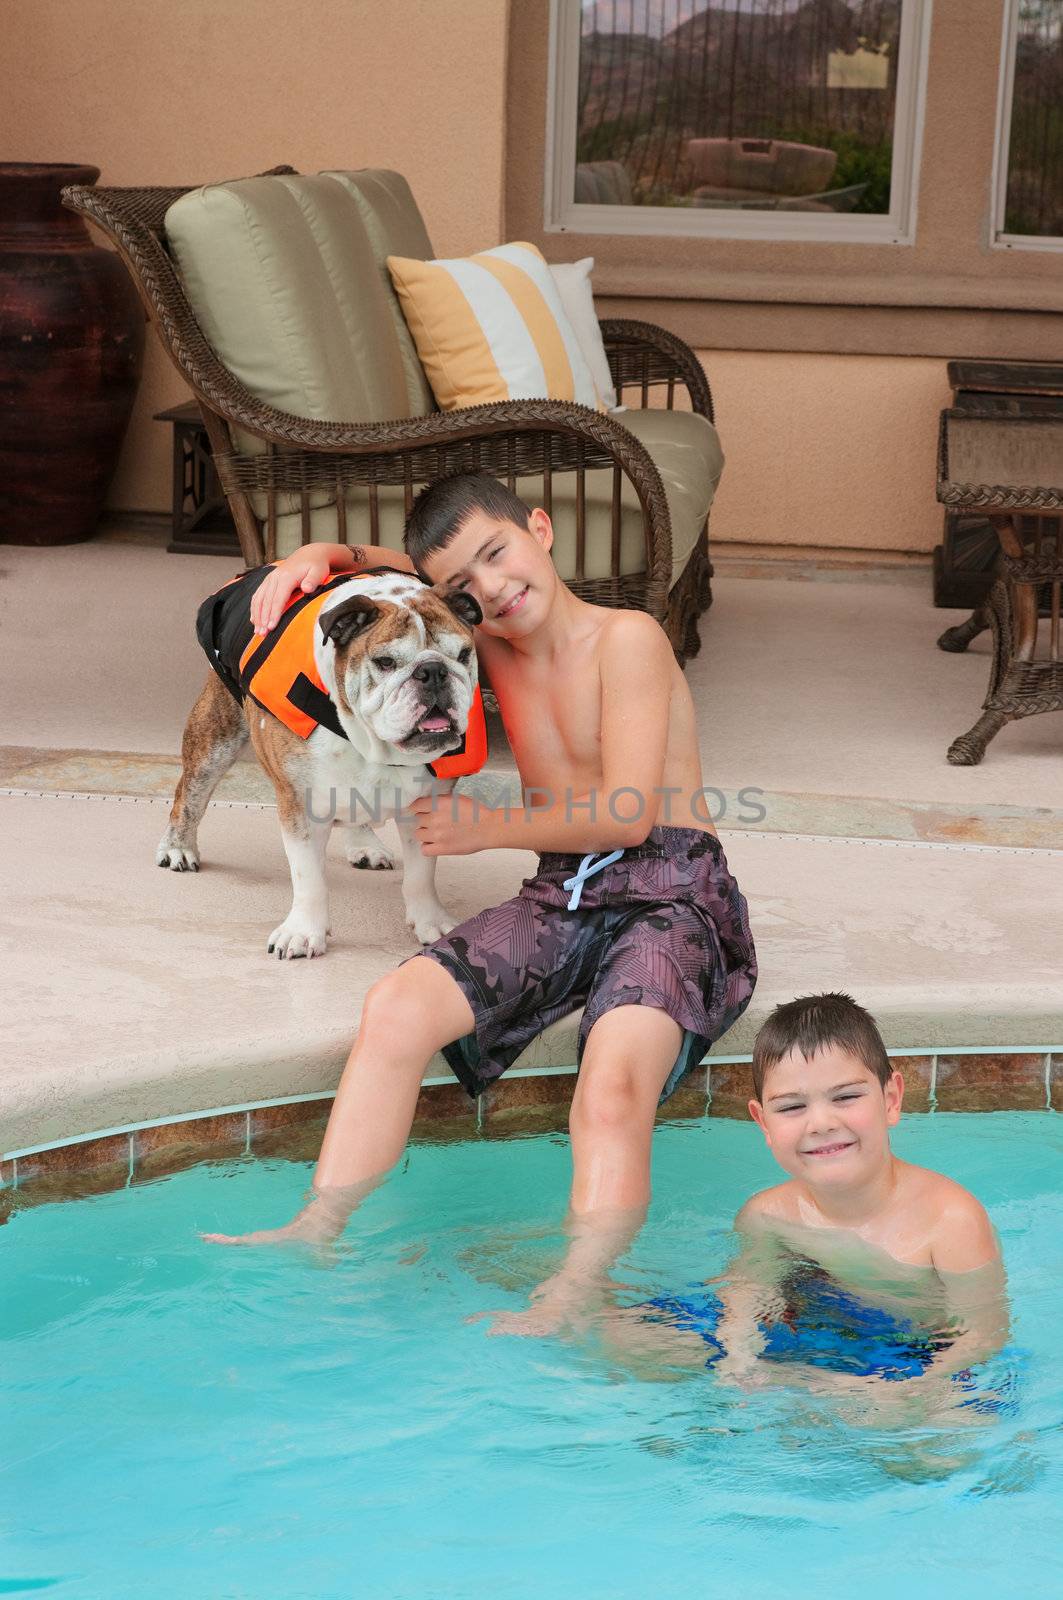 Kids and their pet bulldog playing near the pool